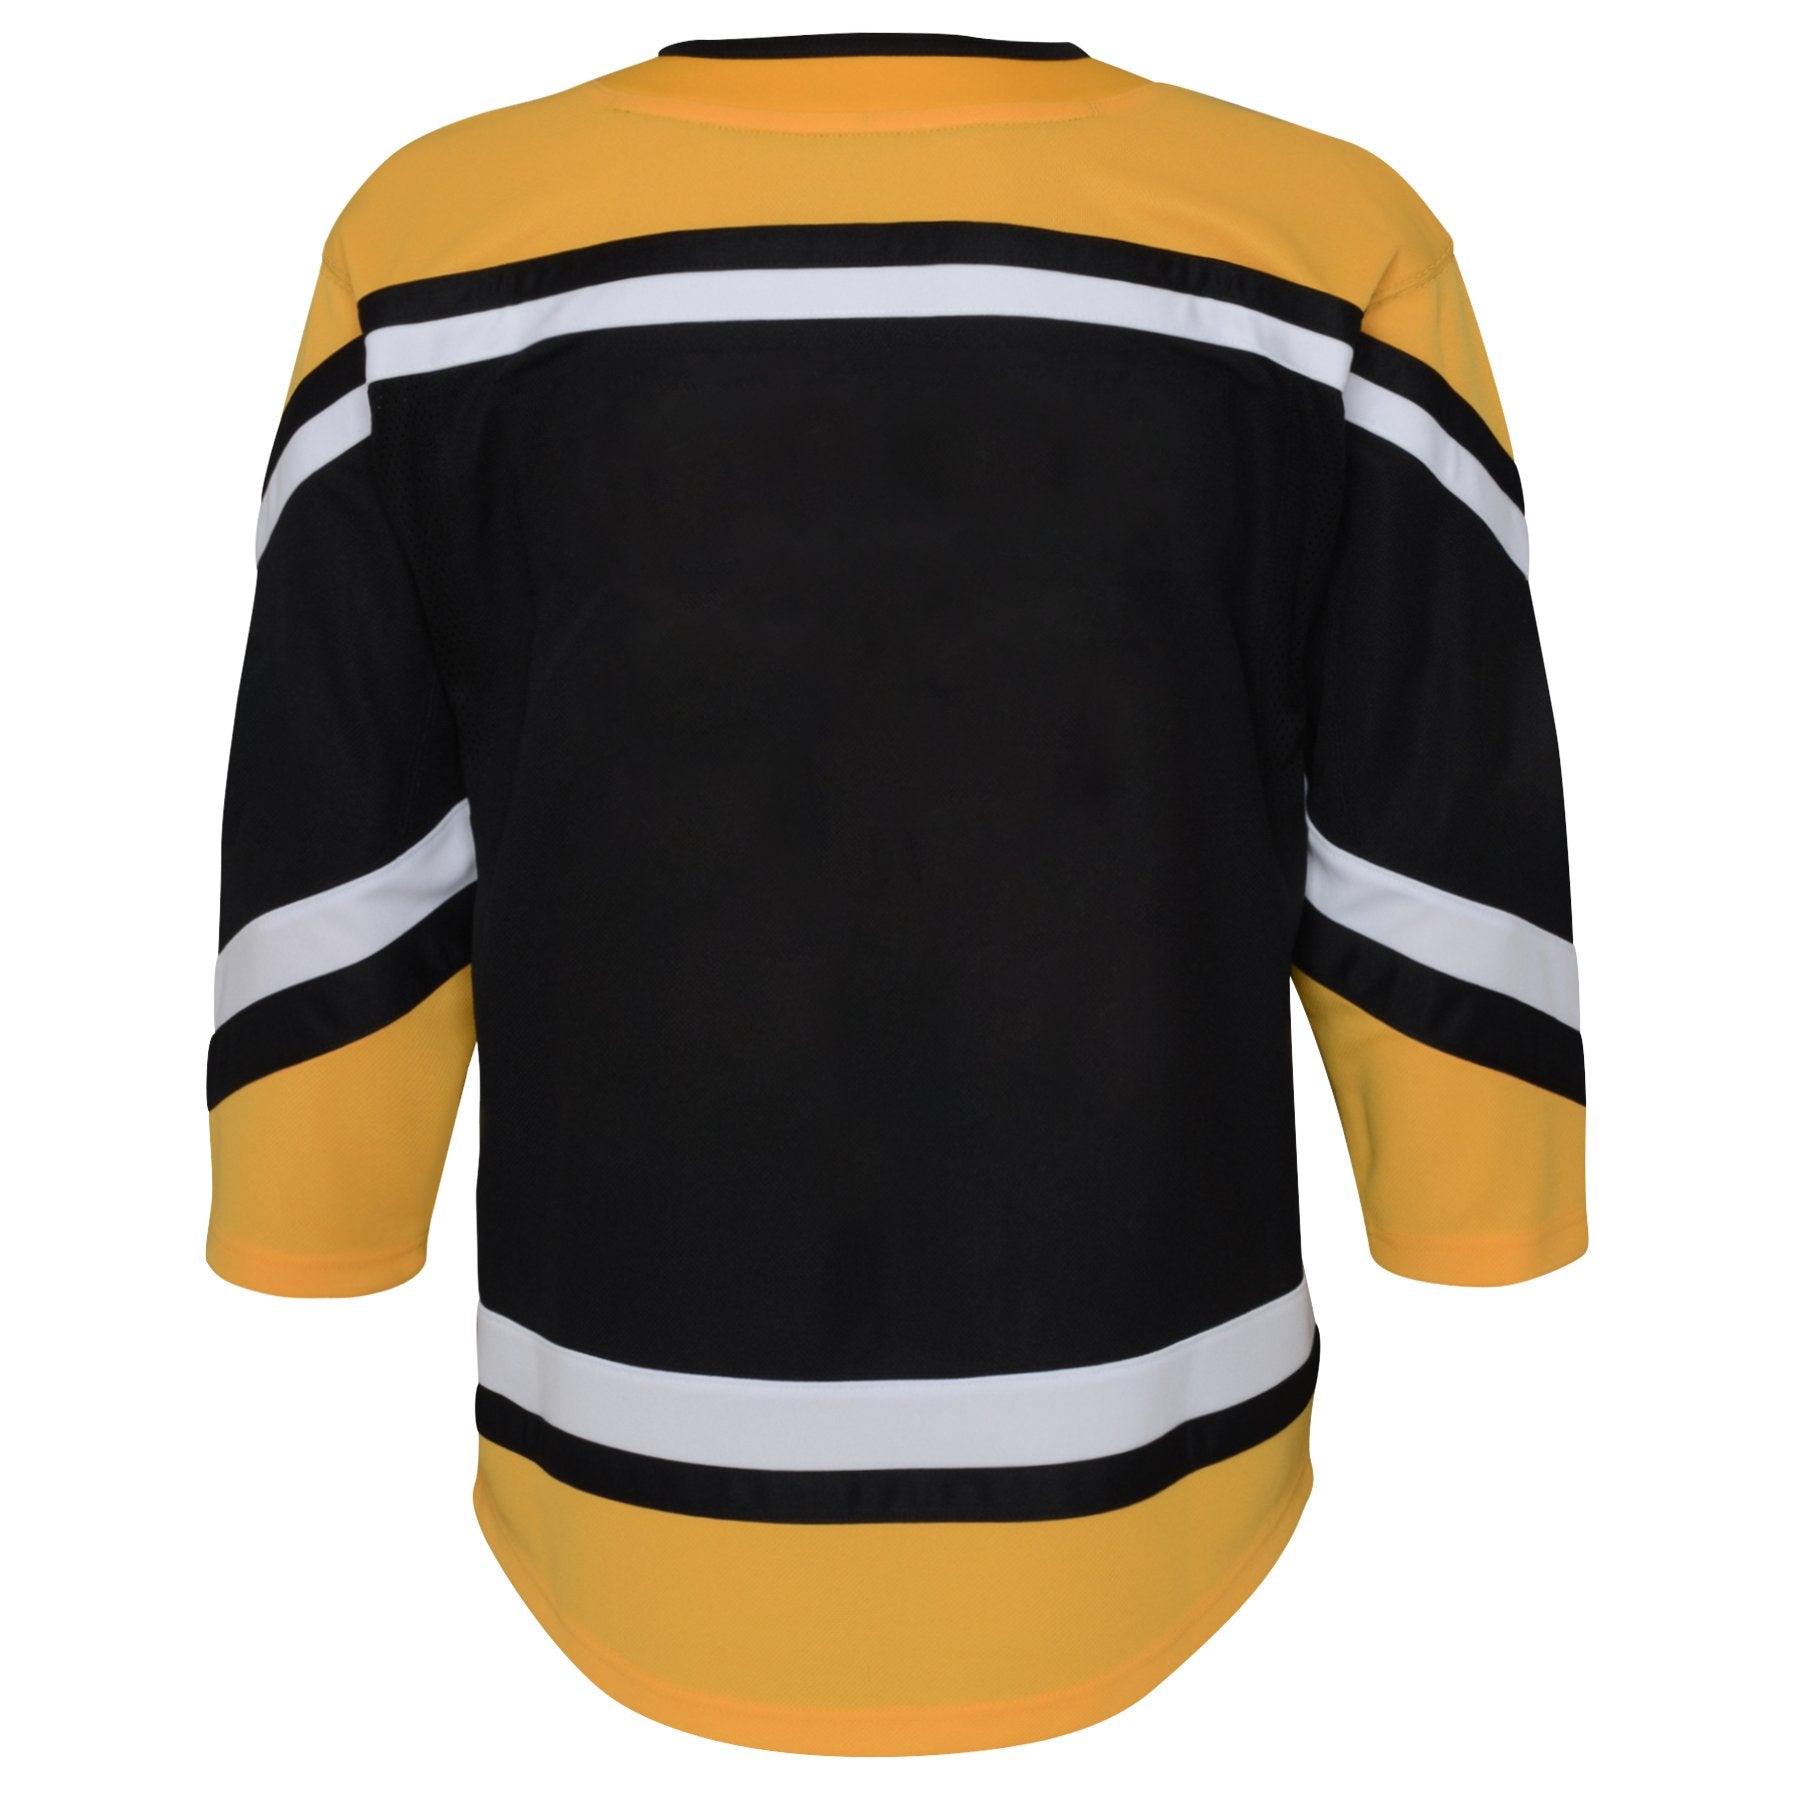 Penguins bring back 'PITTSBURGH' text with new 'reverse retro' jersey